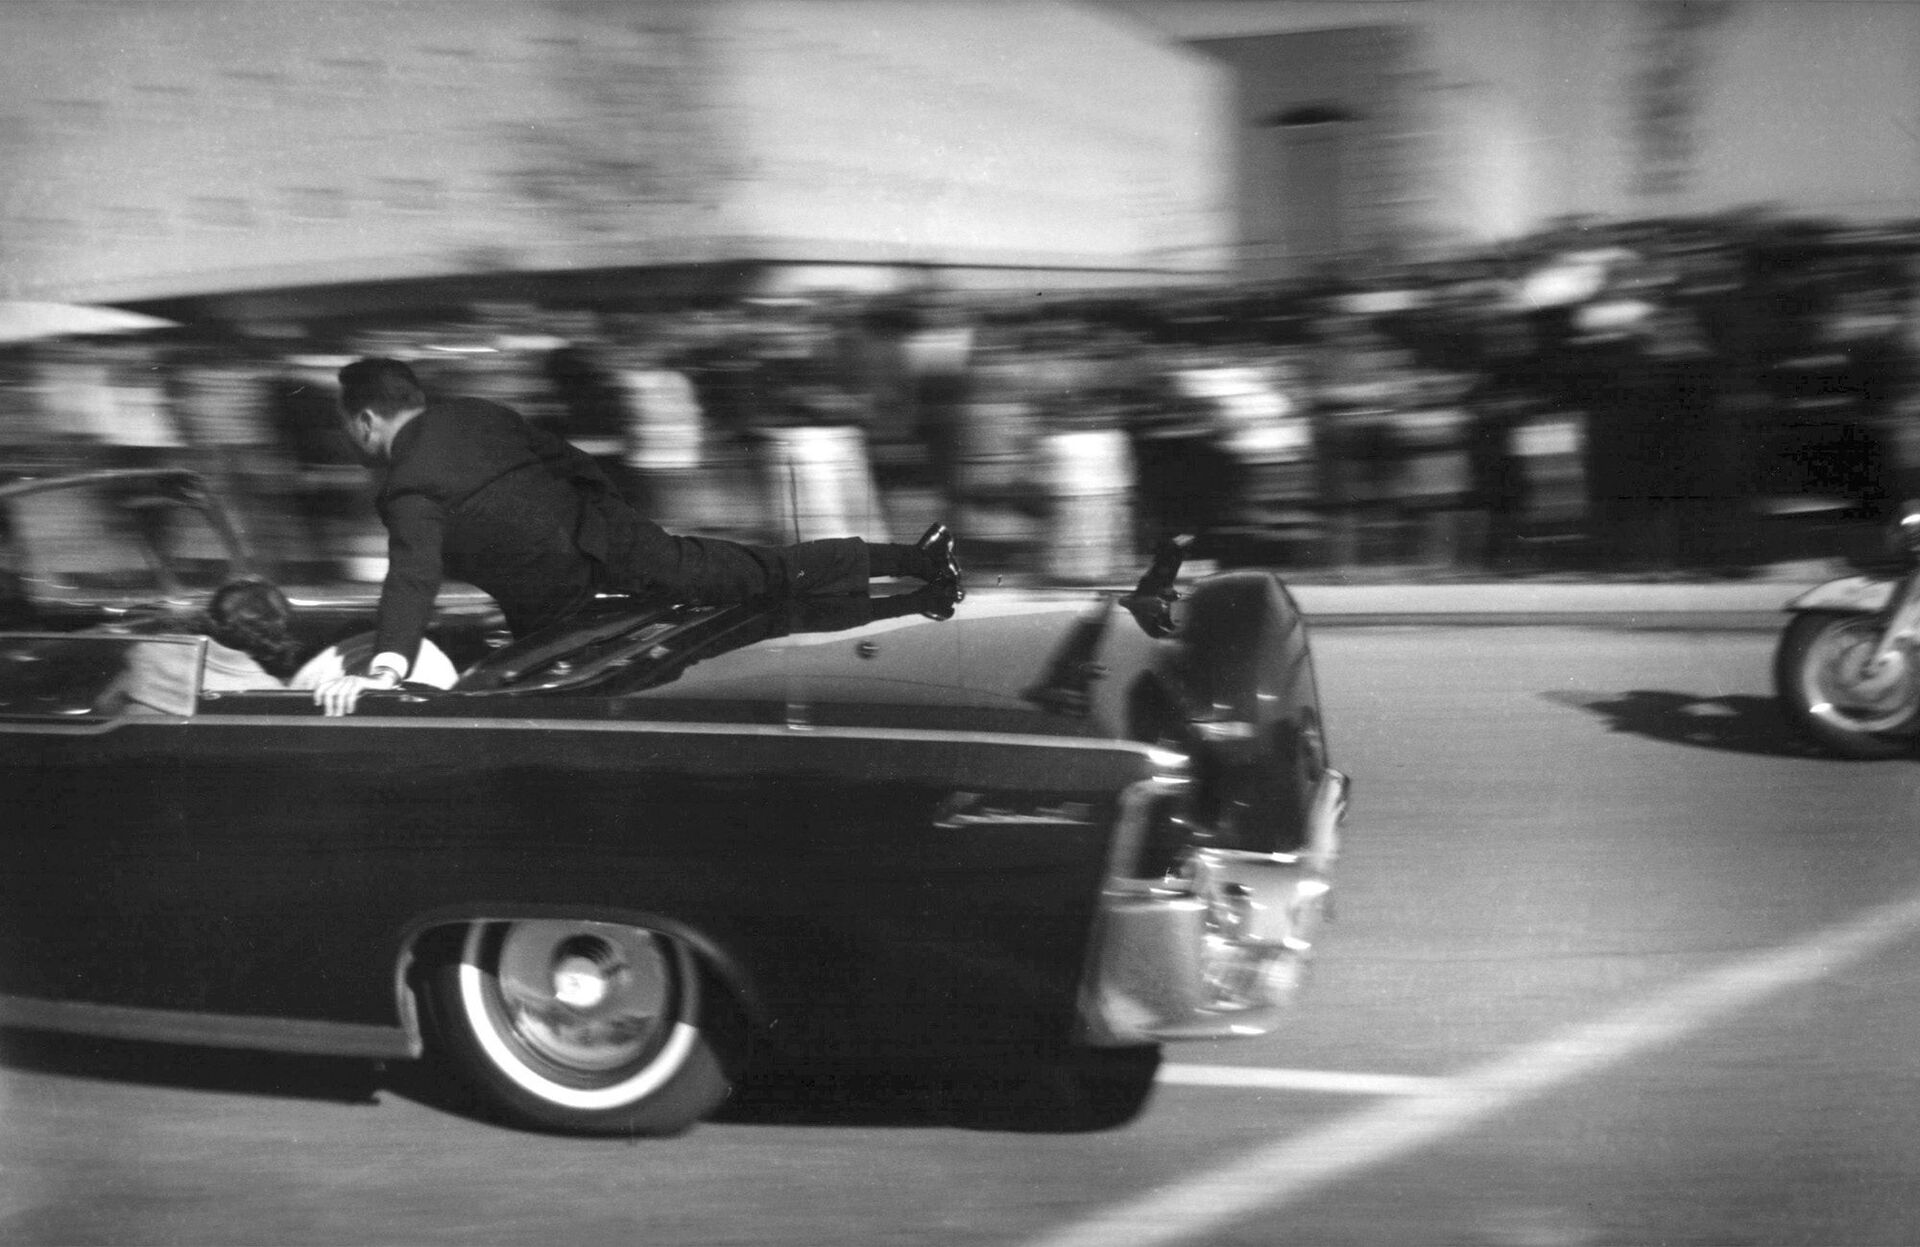 FILE - In this Nov. 22, 1963 file photo, the limousine carrying mortally wounded President John F. Kennedy races toward the hospital seconds after he was shot in Dallas. Secret Service agent Clinton Hill is riding on the back of the car, Nellie Connally, wife of Texas Gov. John Connally, bends over her wounded husband, and first lady Jacqueline Kennedy leans over the president. The National Archives has until Oct. 26, 2017, to disclose the remaining files related to Kennedy's assassination, unless President Donald Trump intervenes.  - Sputnik International, 1920, 07.07.2023